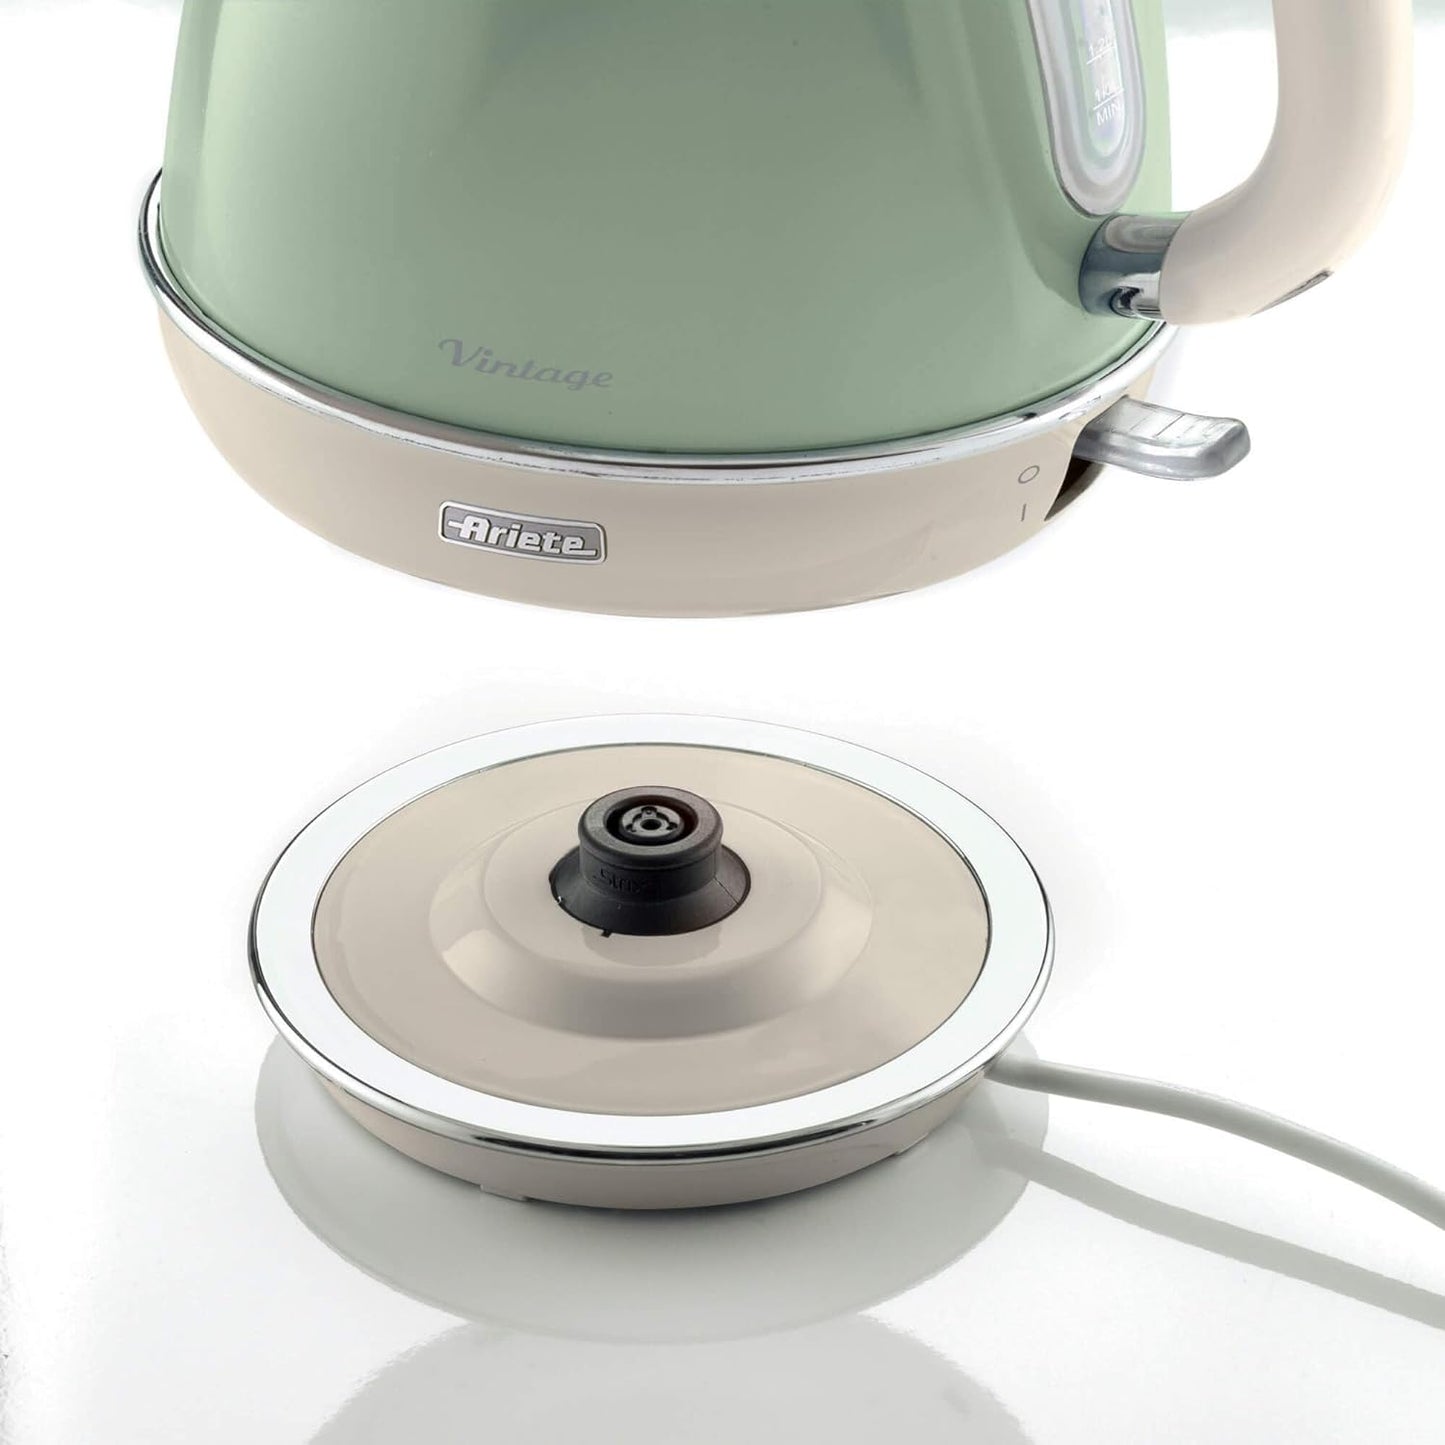 Ariete 2869/04 Retro Style Cordless Jug Kettle, Cool to Touch Exterior and Removable Filter, Water Indicator at Eye Level, Vintage Design, 2000 W, 1.7 litres, Green